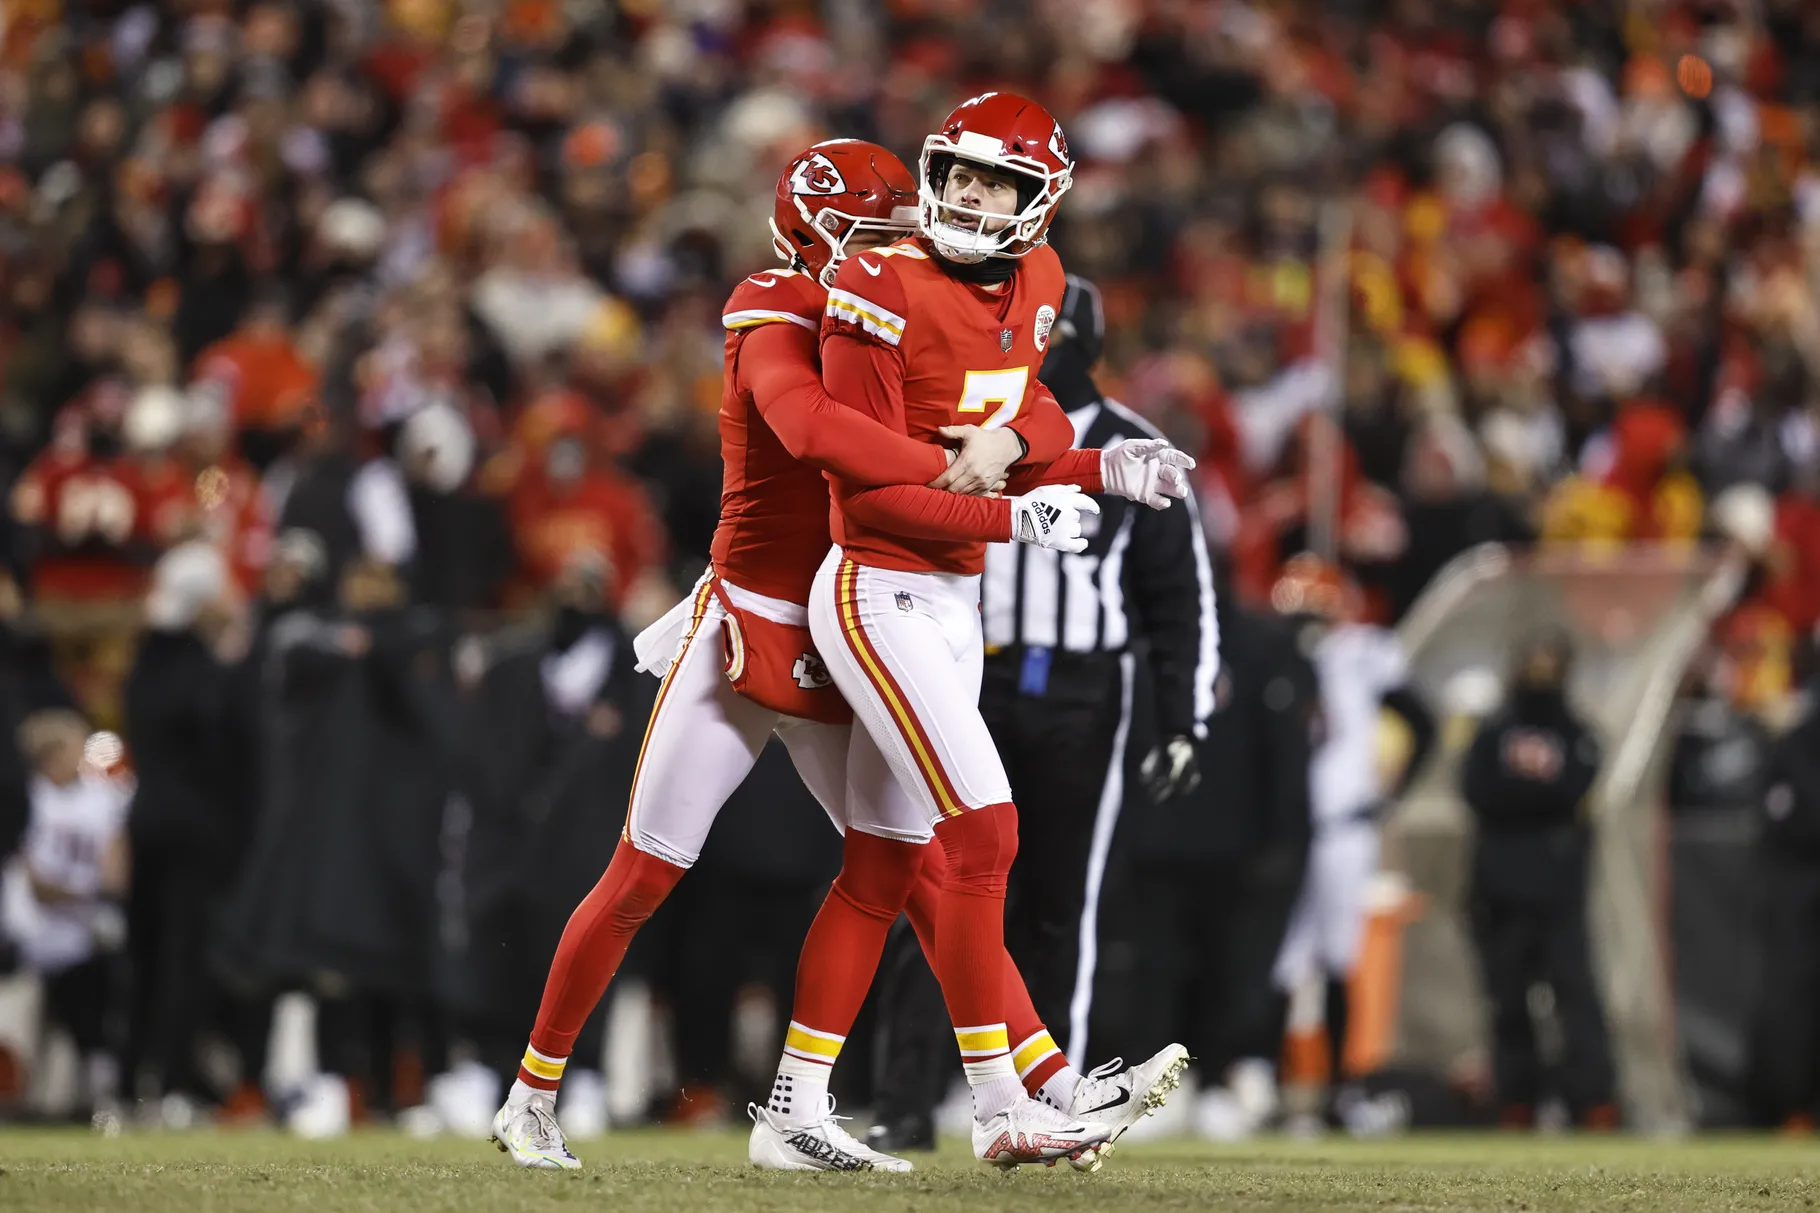 Westminster+graduate+Harrison+Butker%2C+sealed+the+AFC+championship+game+with+a+game-winning+field+goal%2C+taking+the+Chiefs+to+the+Super+Bowl+again+%28credit+to+Getty+Images%29